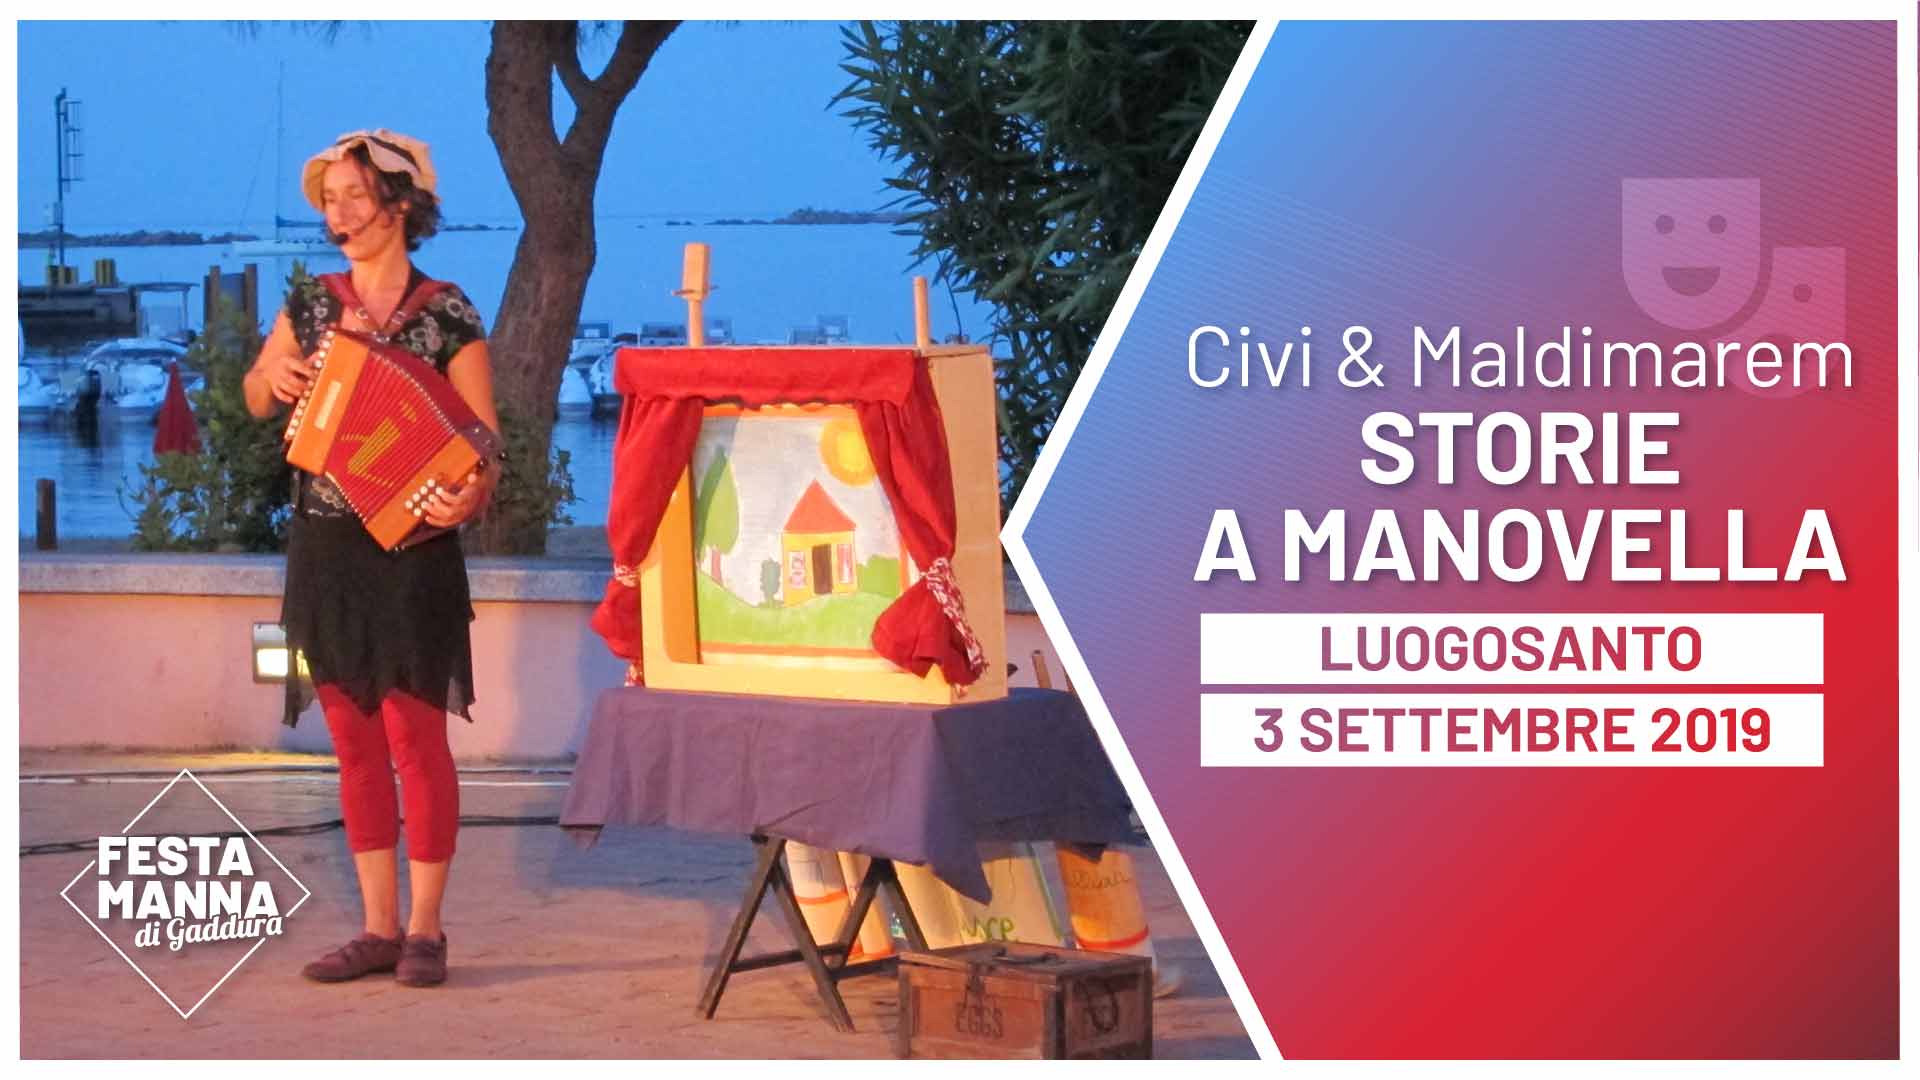 “Storie a manovella”, show for children aged 2 to 10, by Civi and Maldimarem